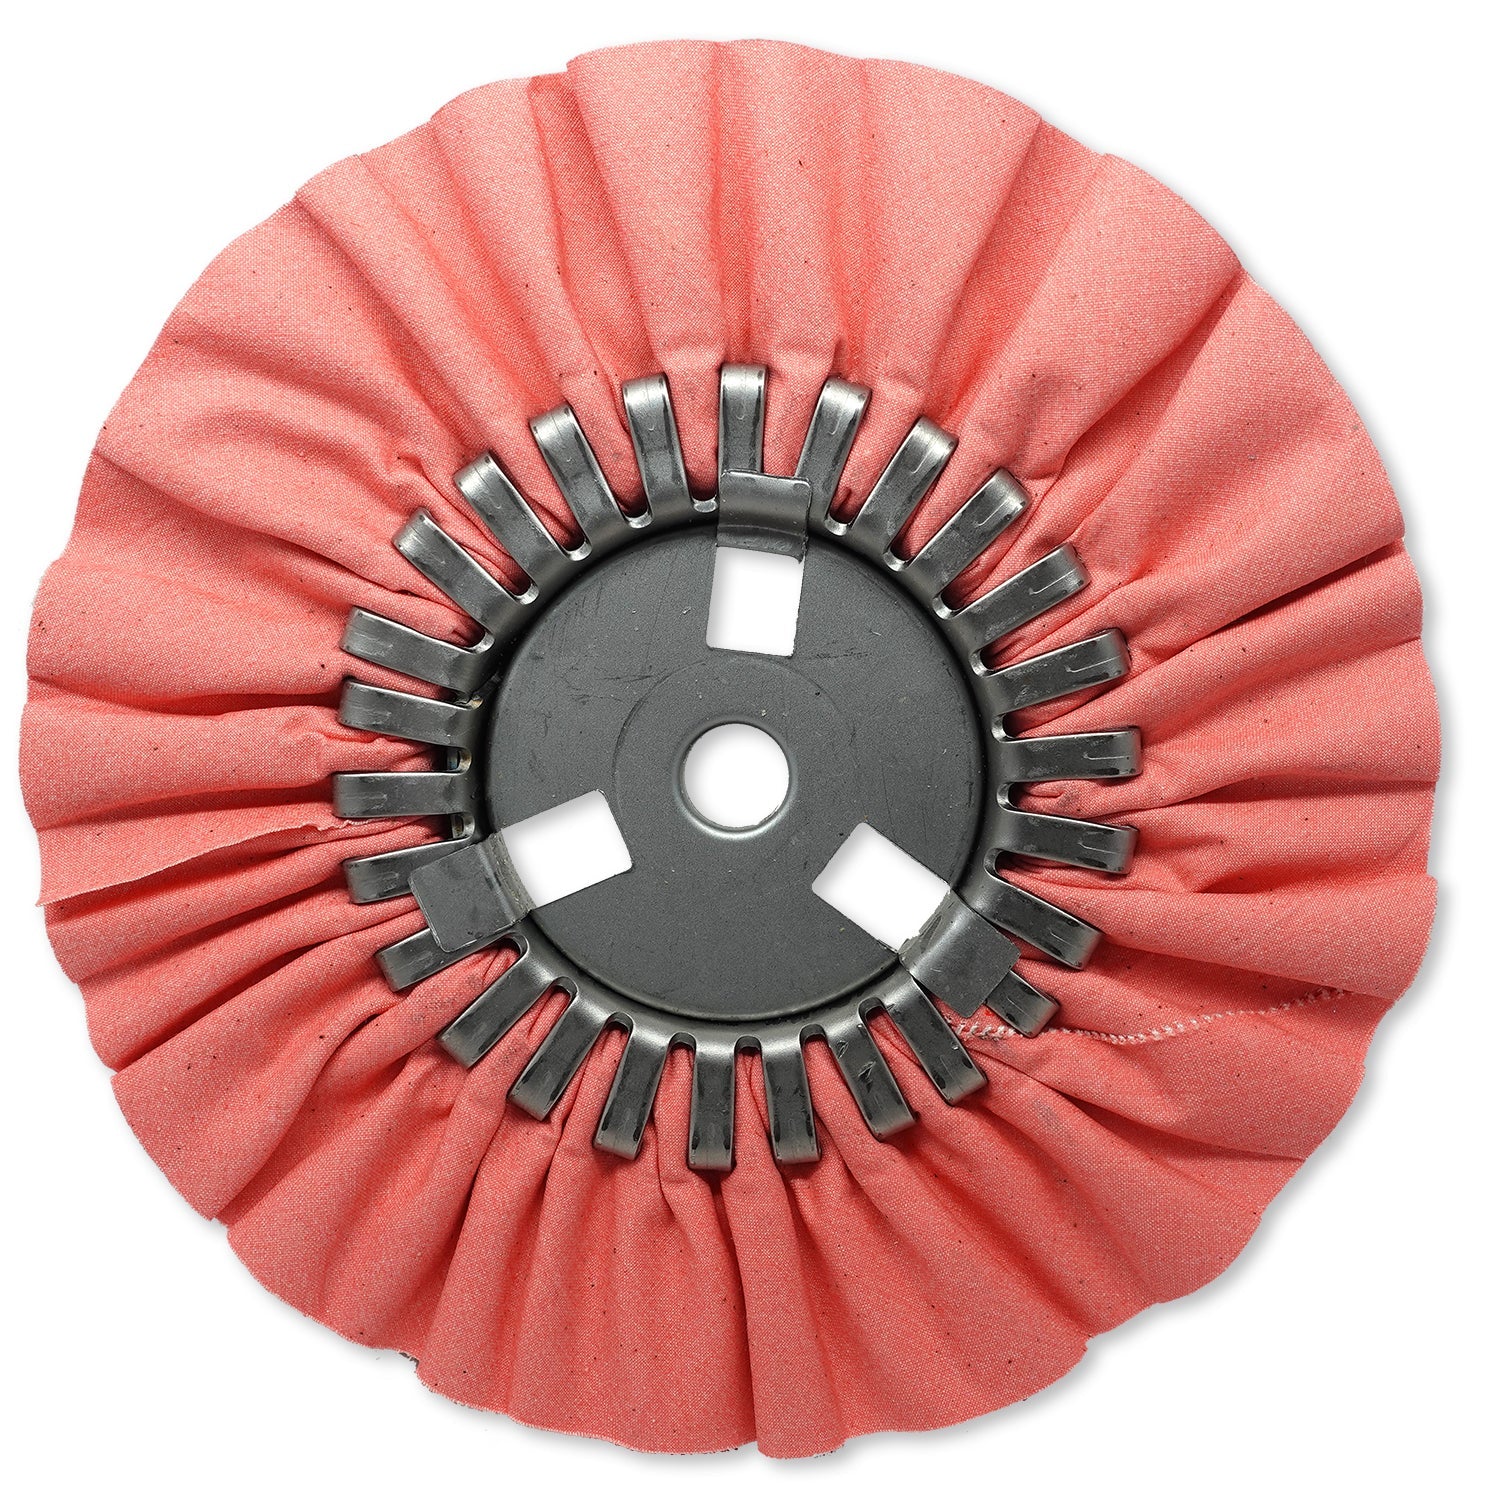 8 X 5/8 Arbor Mill Treated Airway Buffing Wheels - Red Label Abrasives